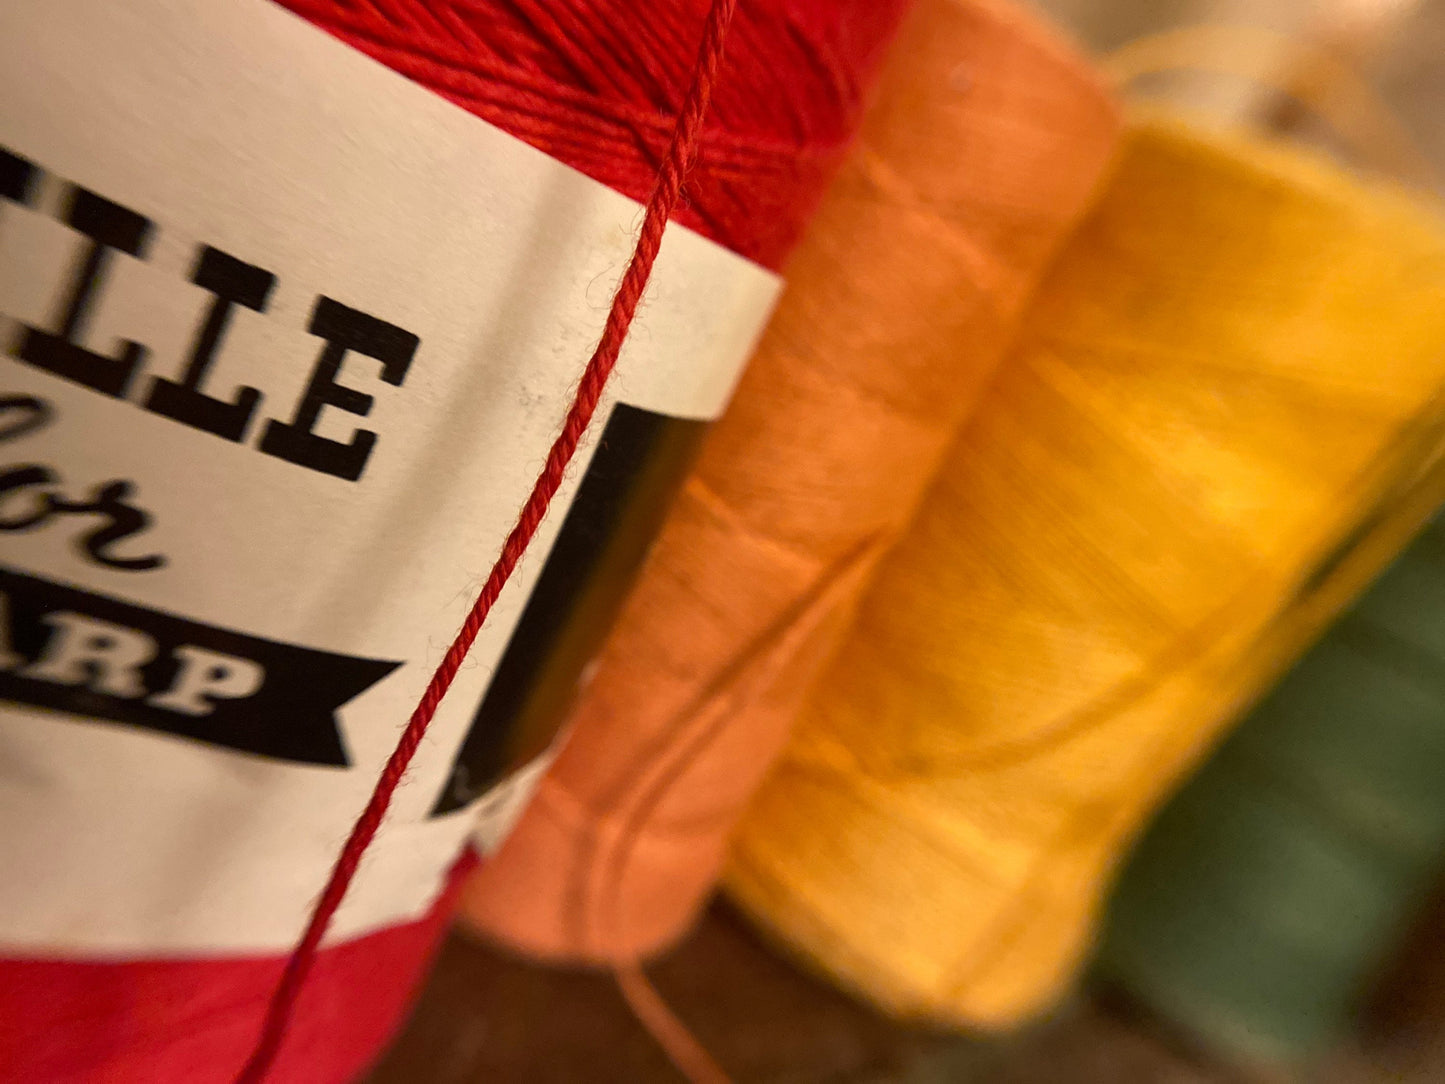 10 yards of parcel string / 100% cotton bakers twine / vintage gift tie: red white green black orange gold aqua gray new old stock